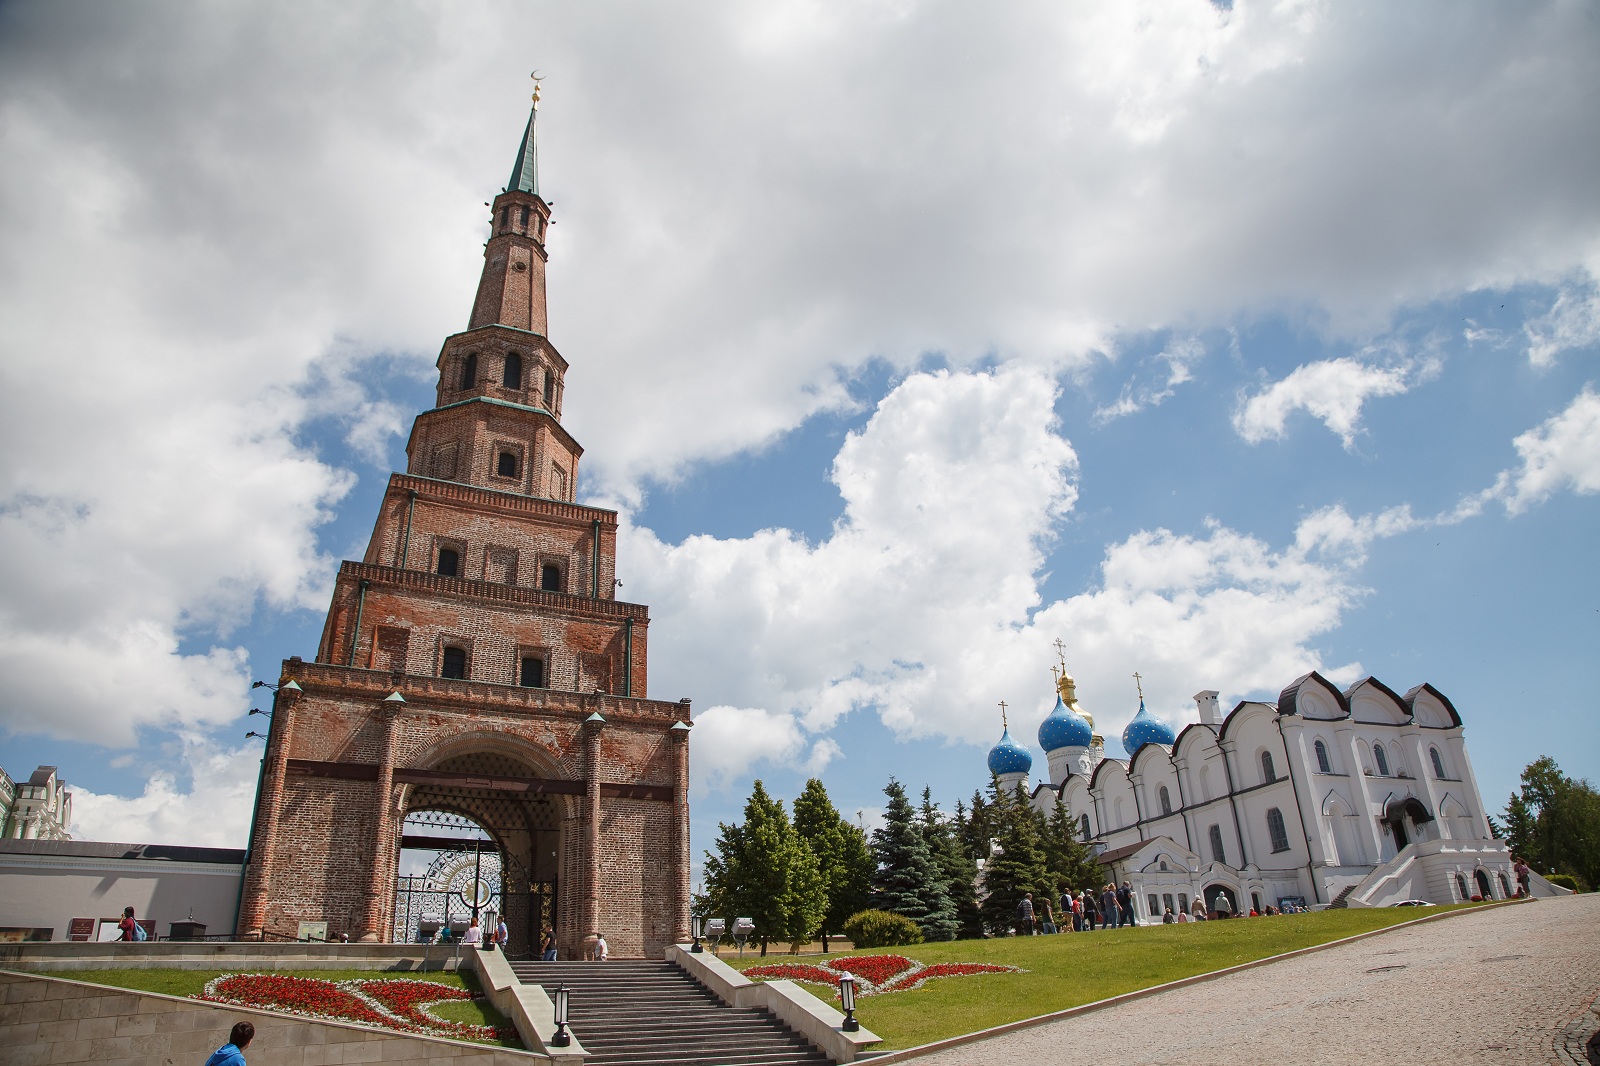 Söyembikä_Tower_The_Watchtower_is_the_architectural_symbol_of_Kazan_One_of_the_so-called_leaning_towers_Its_height_is_58_metres.jpg